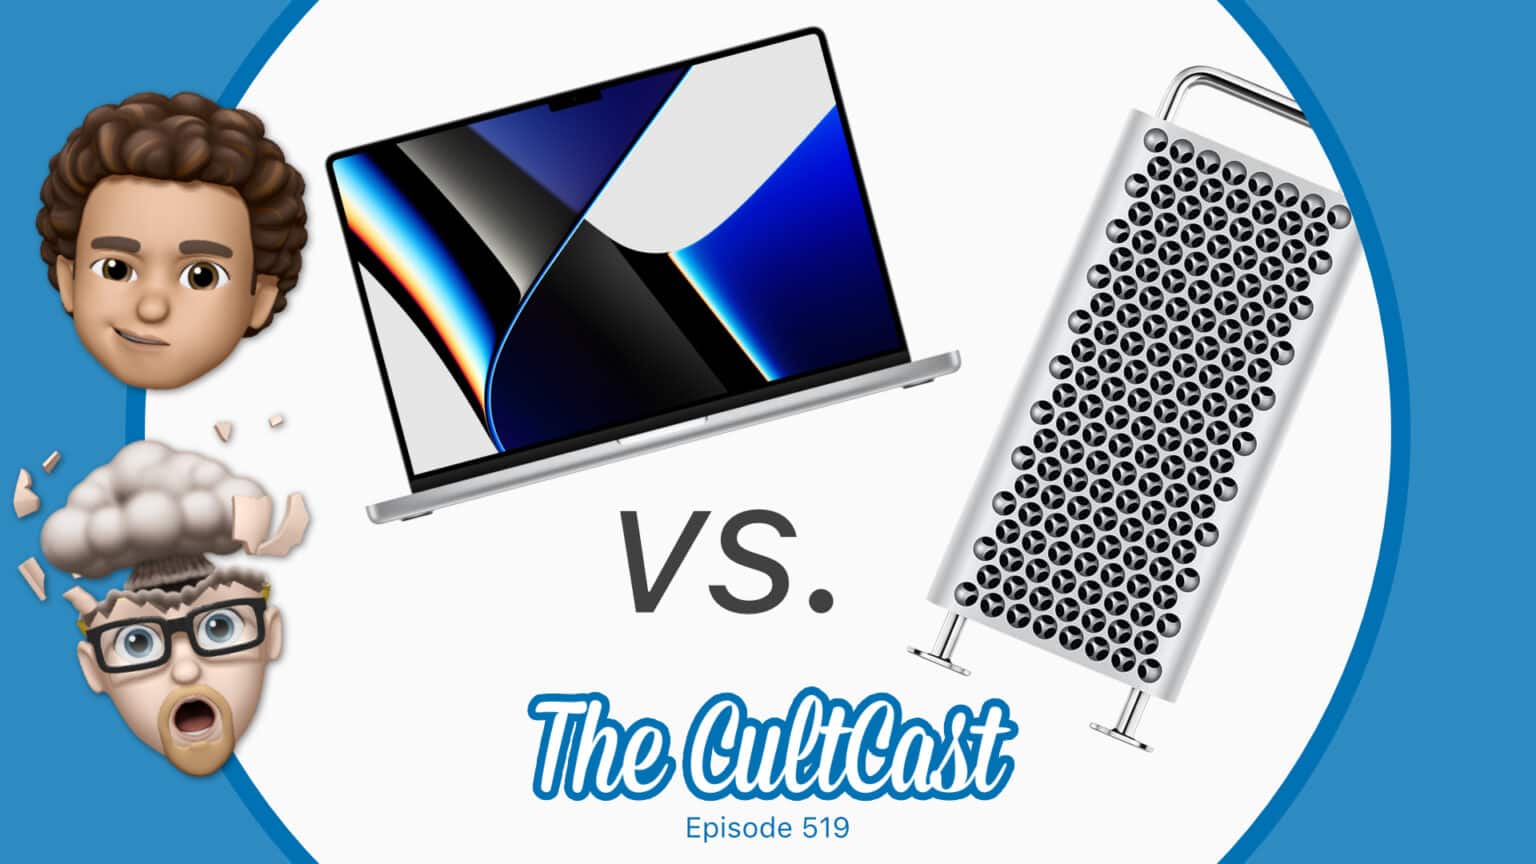 The CultCast: M1 MacBook Pro vs. Mac Pro: The results will shock you!